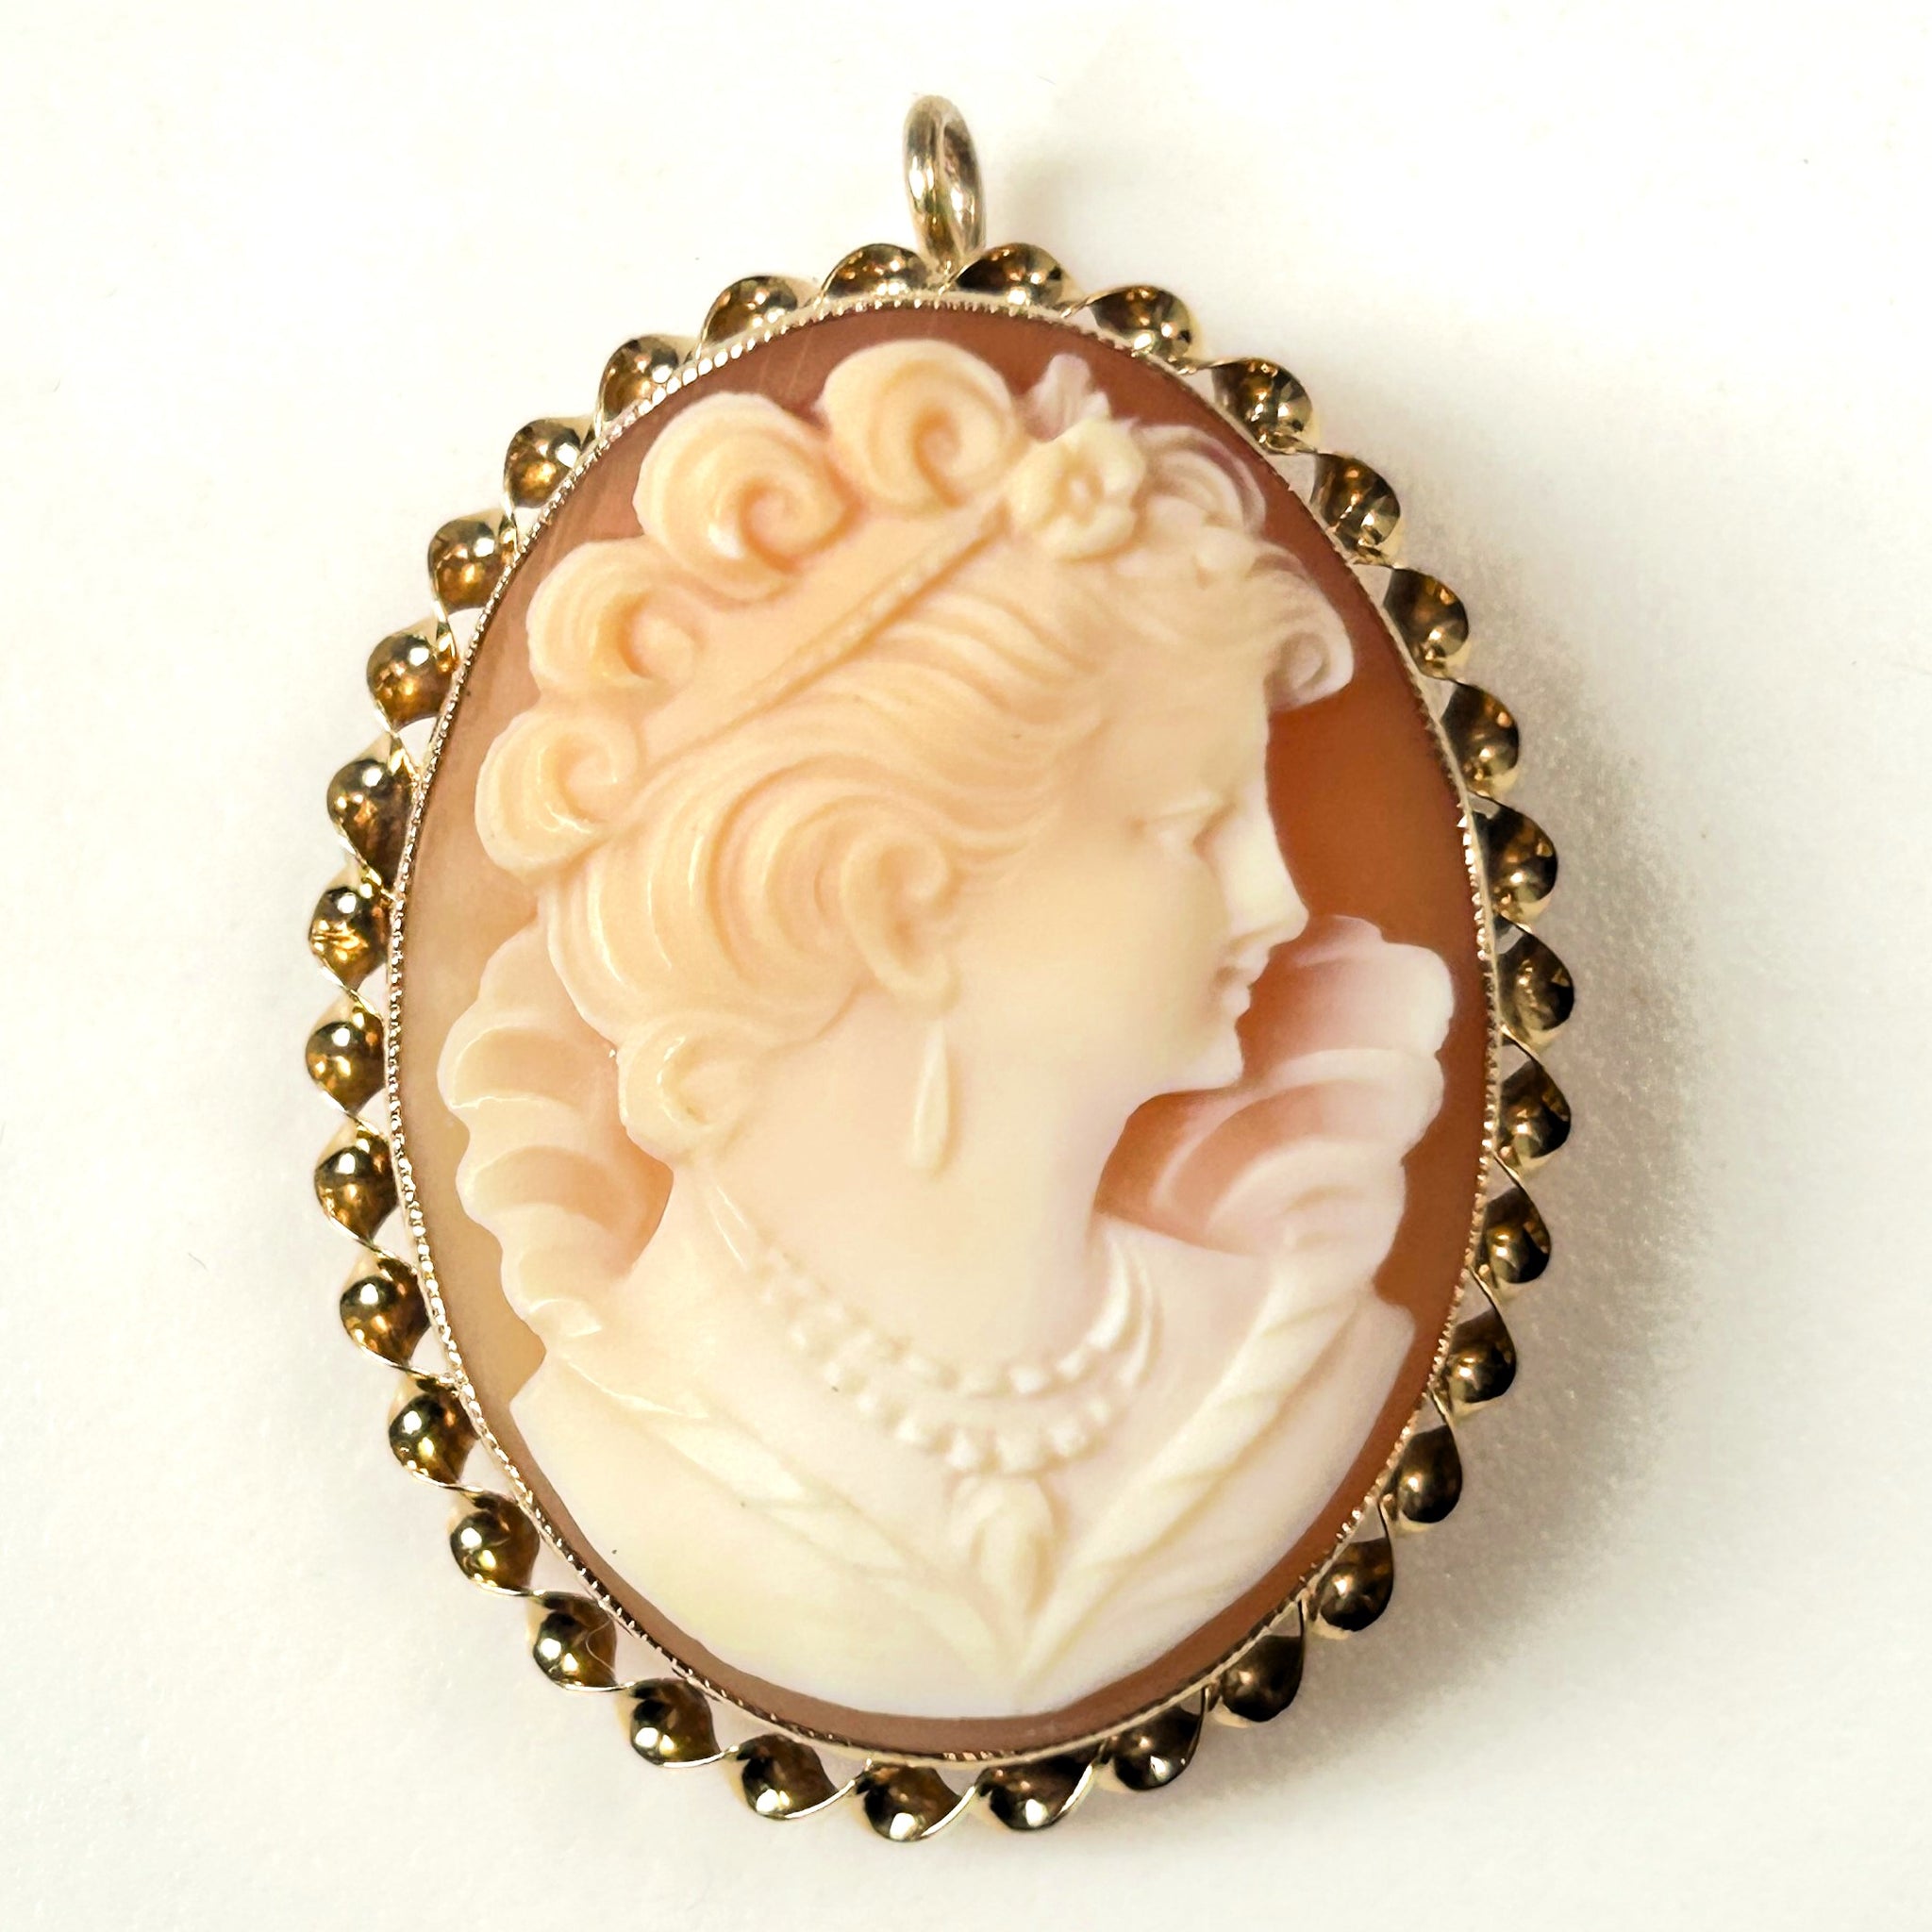 Vintage 9ct Gold and Shell Cameo Pendant Brooch